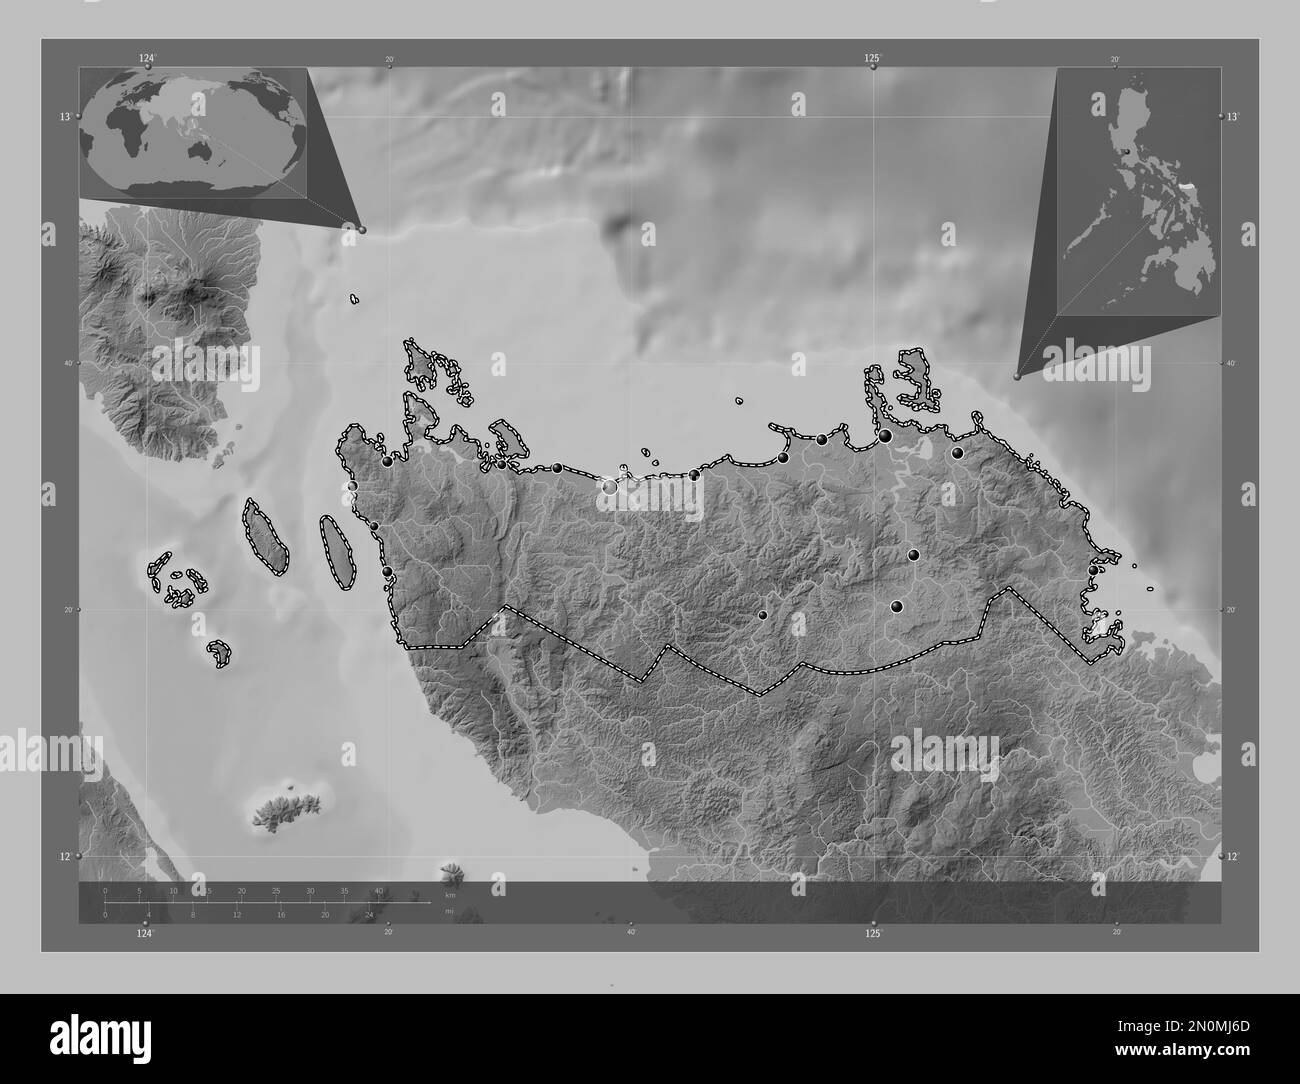 Northern Samar, province of Philippines. Grayscale elevation map with lakes and rivers. Locations of major cities of the region. Corner auxiliary loca Stock Photo